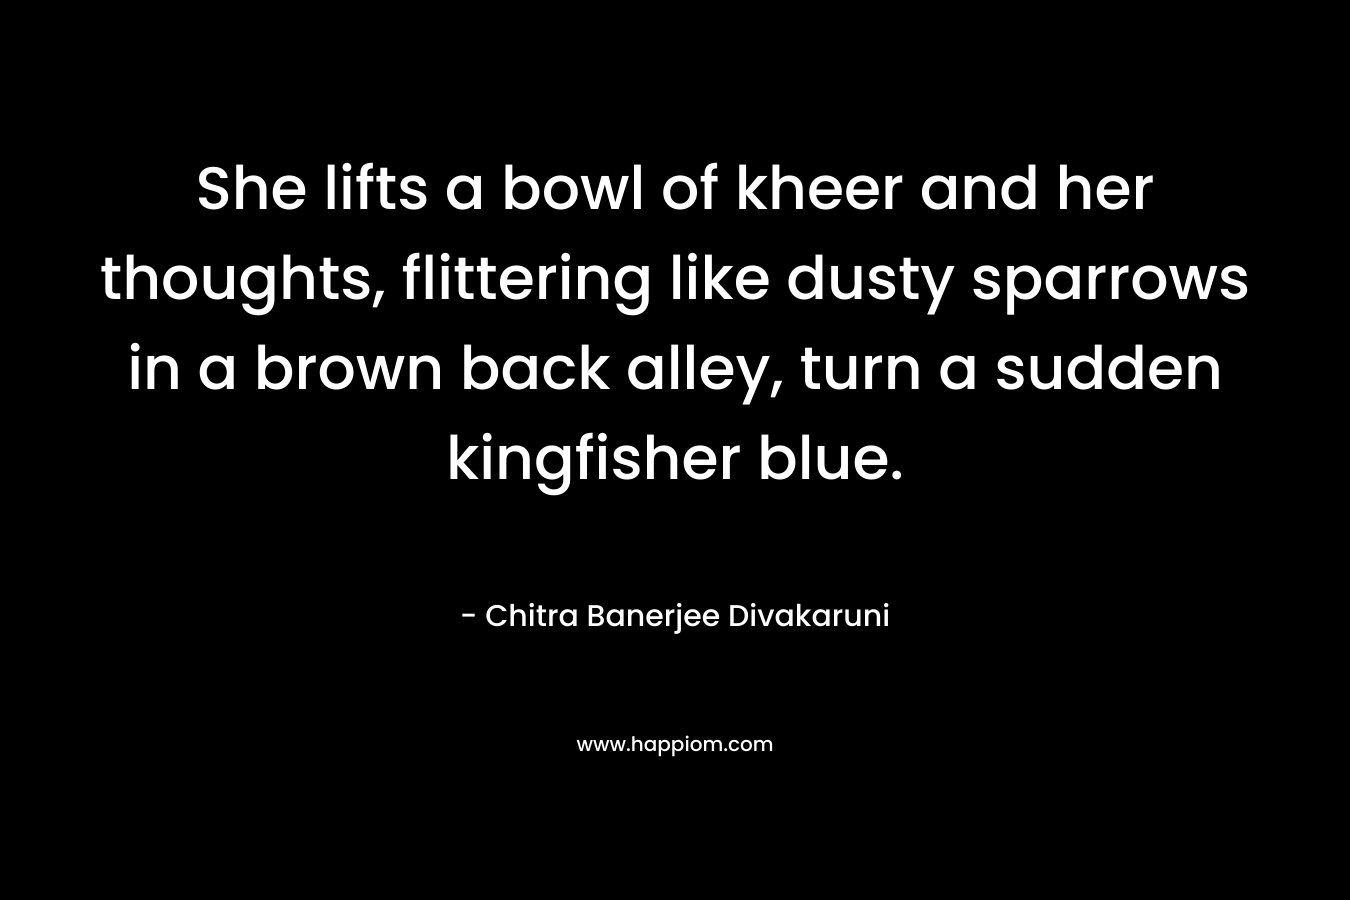 She lifts a bowl of kheer and her thoughts, flittering like dusty sparrows in a brown back alley, turn a sudden kingfisher blue.